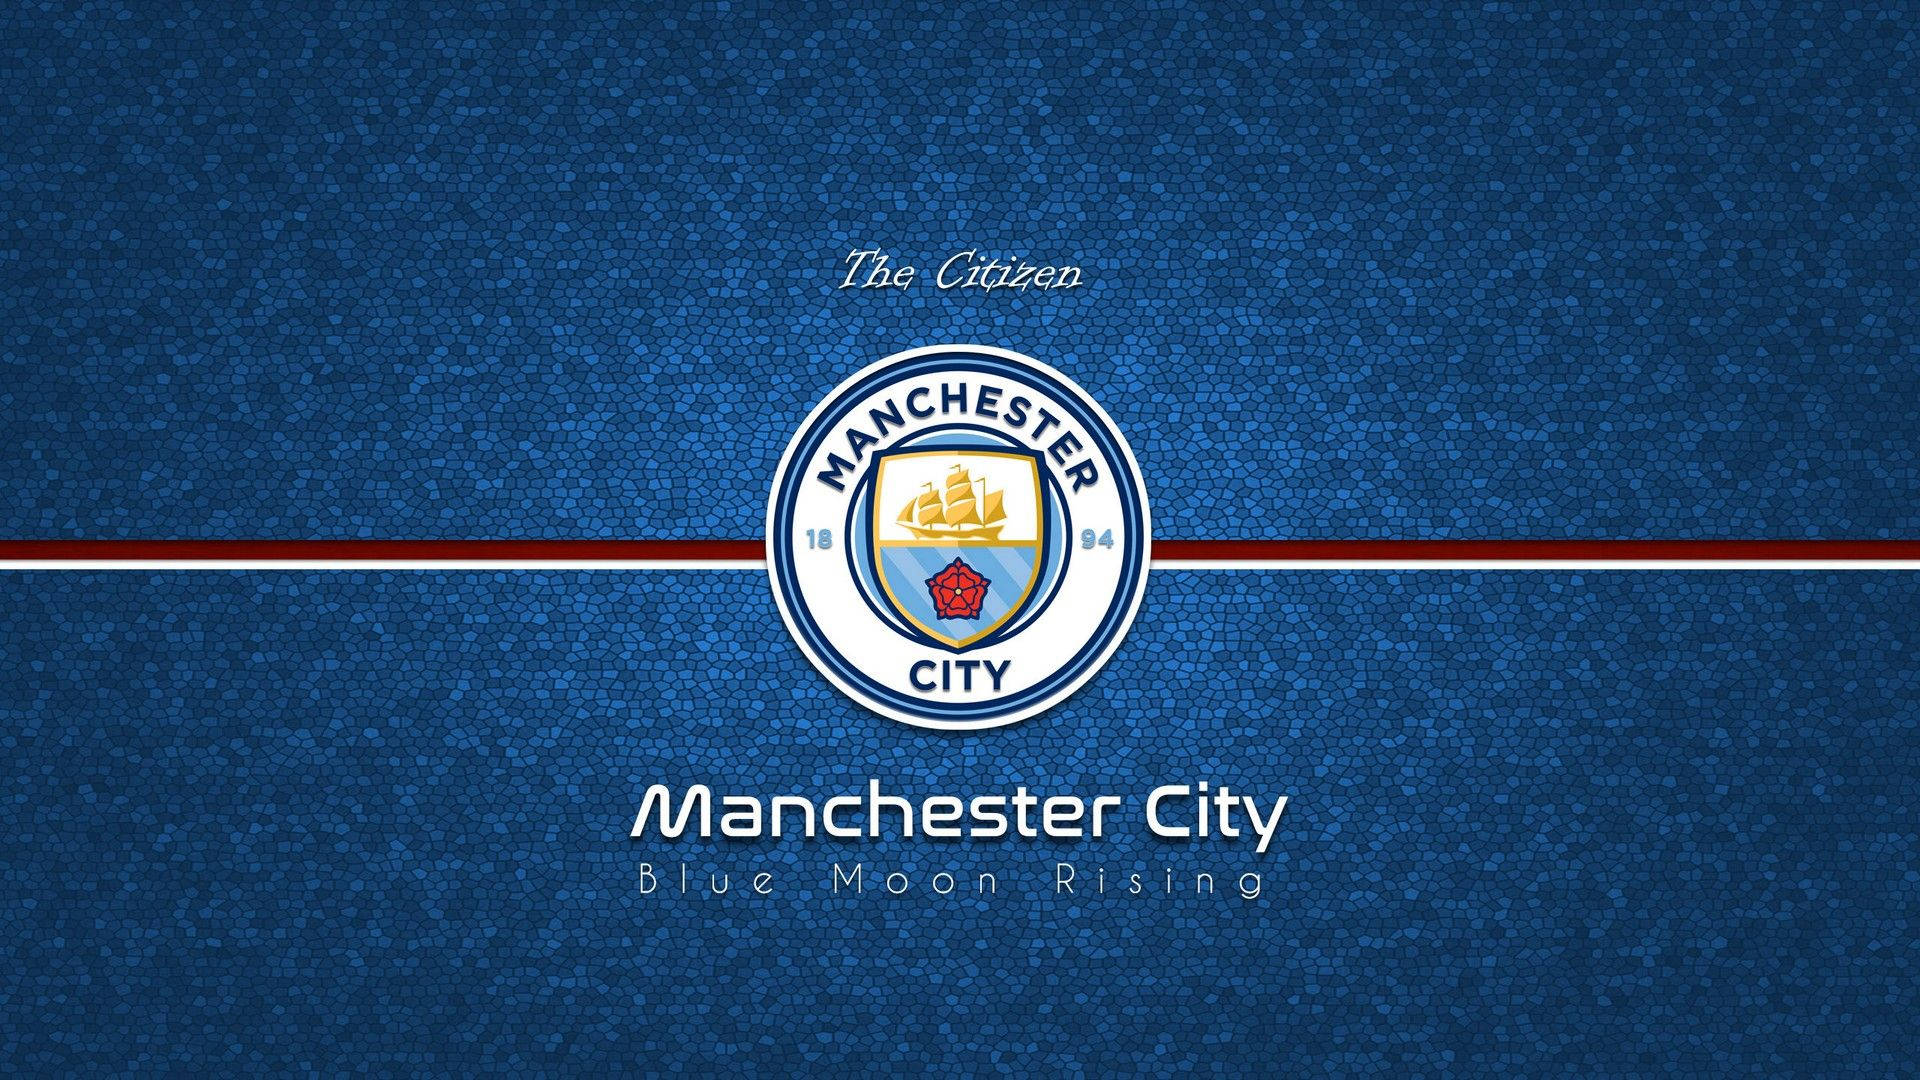 Manchester City Football Club rises above the rest. Wallpaper